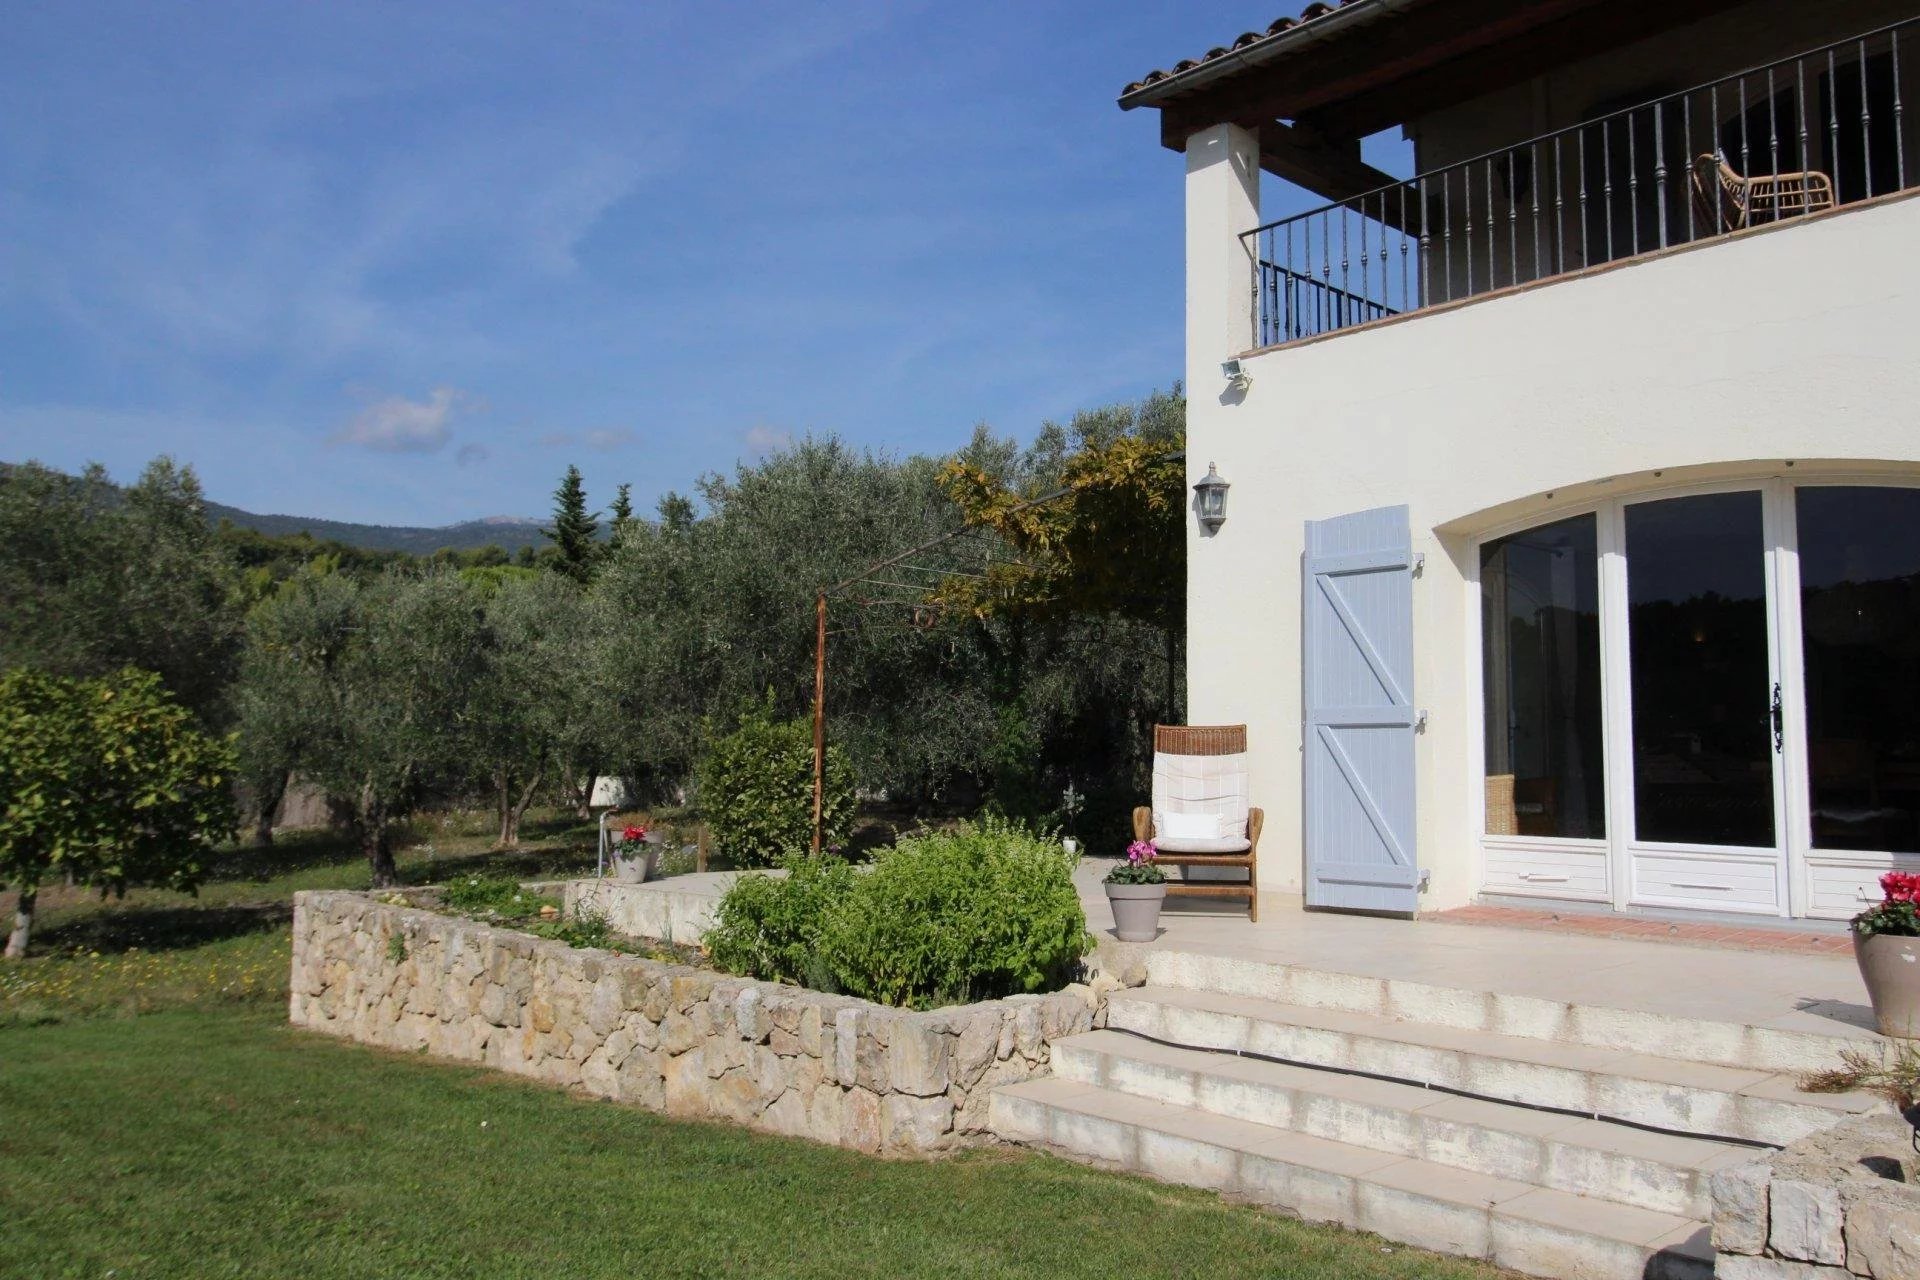 Charming villa with 6 bedrooms and a large flat garden